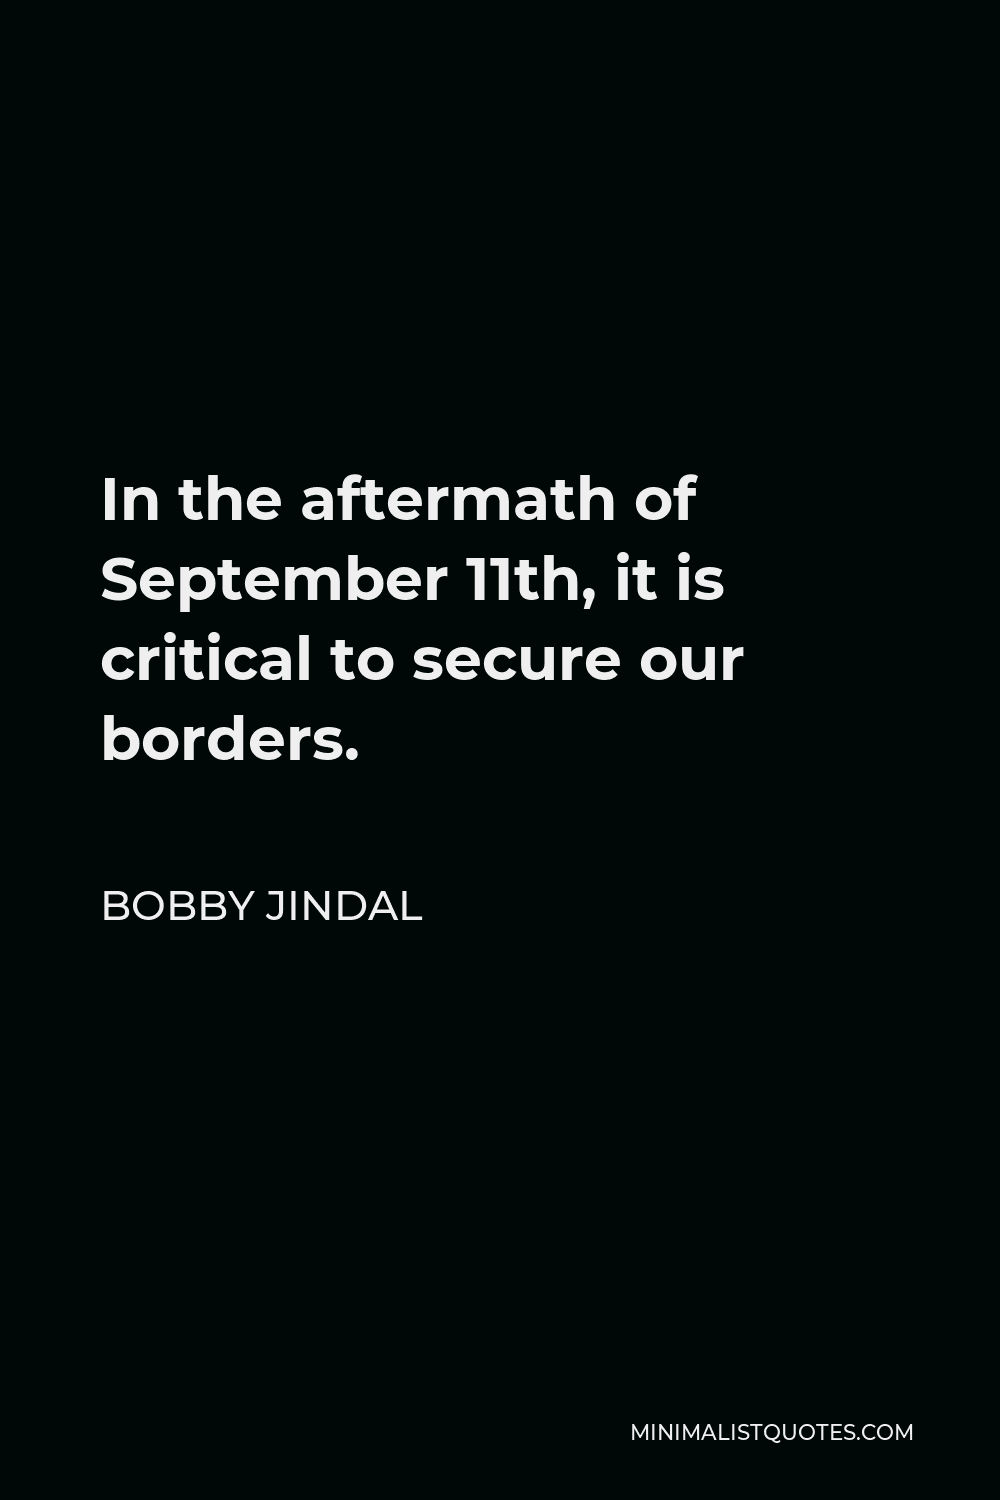 Bobby Jindal Quote - In the aftermath of September 11th, it is critical to secure our borders.